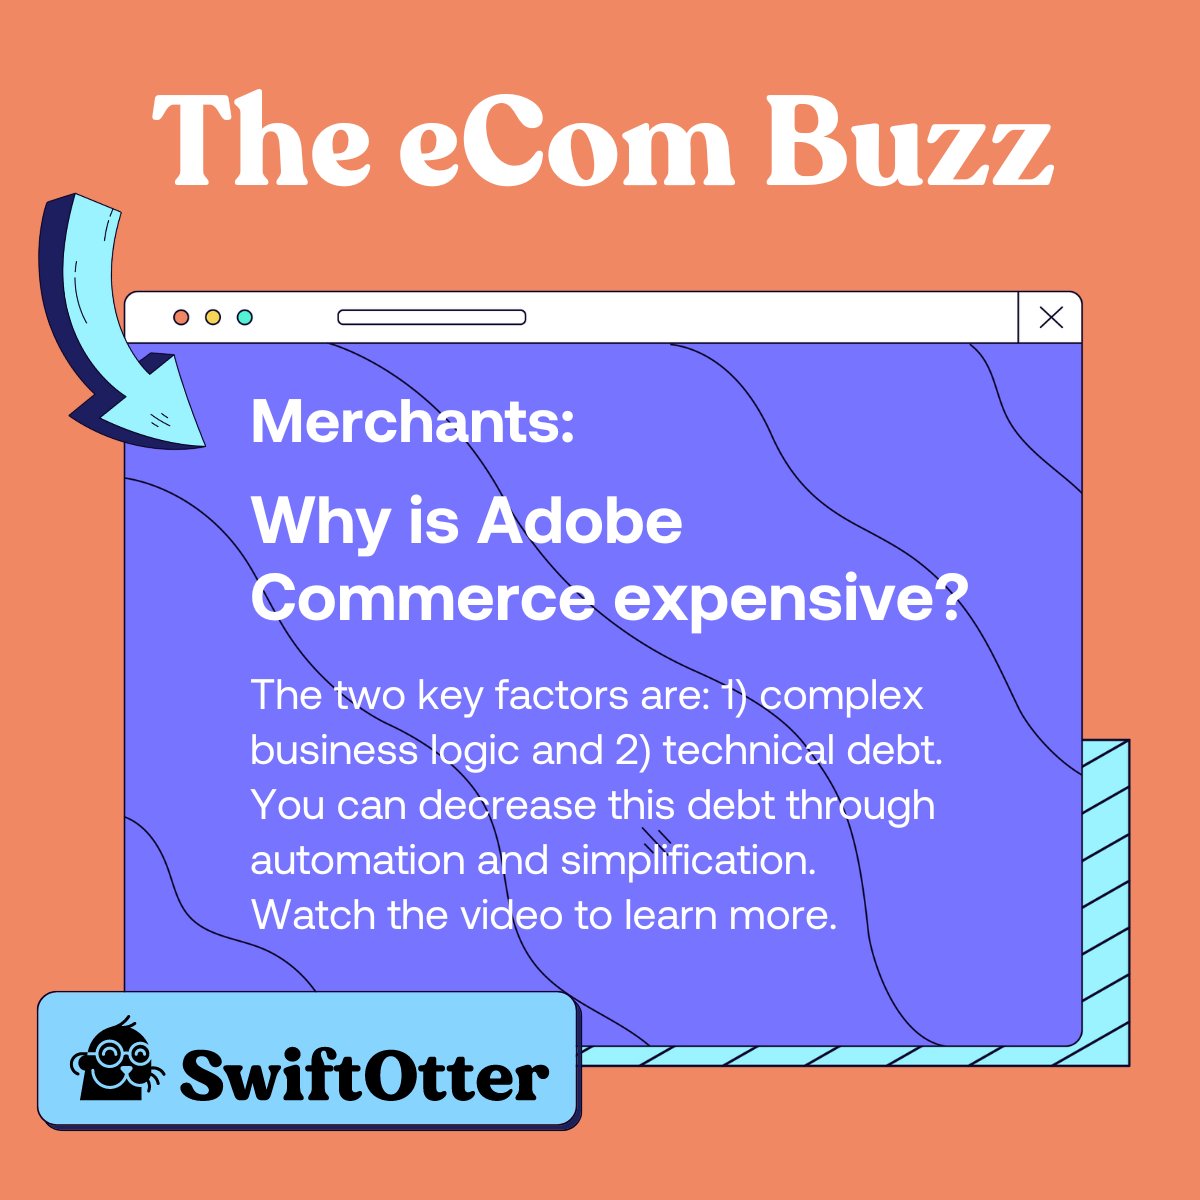 Why is Adobe Commerce expensive?
Want to learn more? Check the comments for Episode 3 of The eCom Buzz.

#swiftotter #adobecommerce #magento #magentodeveloper #adobepartner #bigcommerce #bigcommercedeveloper #bigcommercepartner #excellentecommerceexperiences #theecombuzz